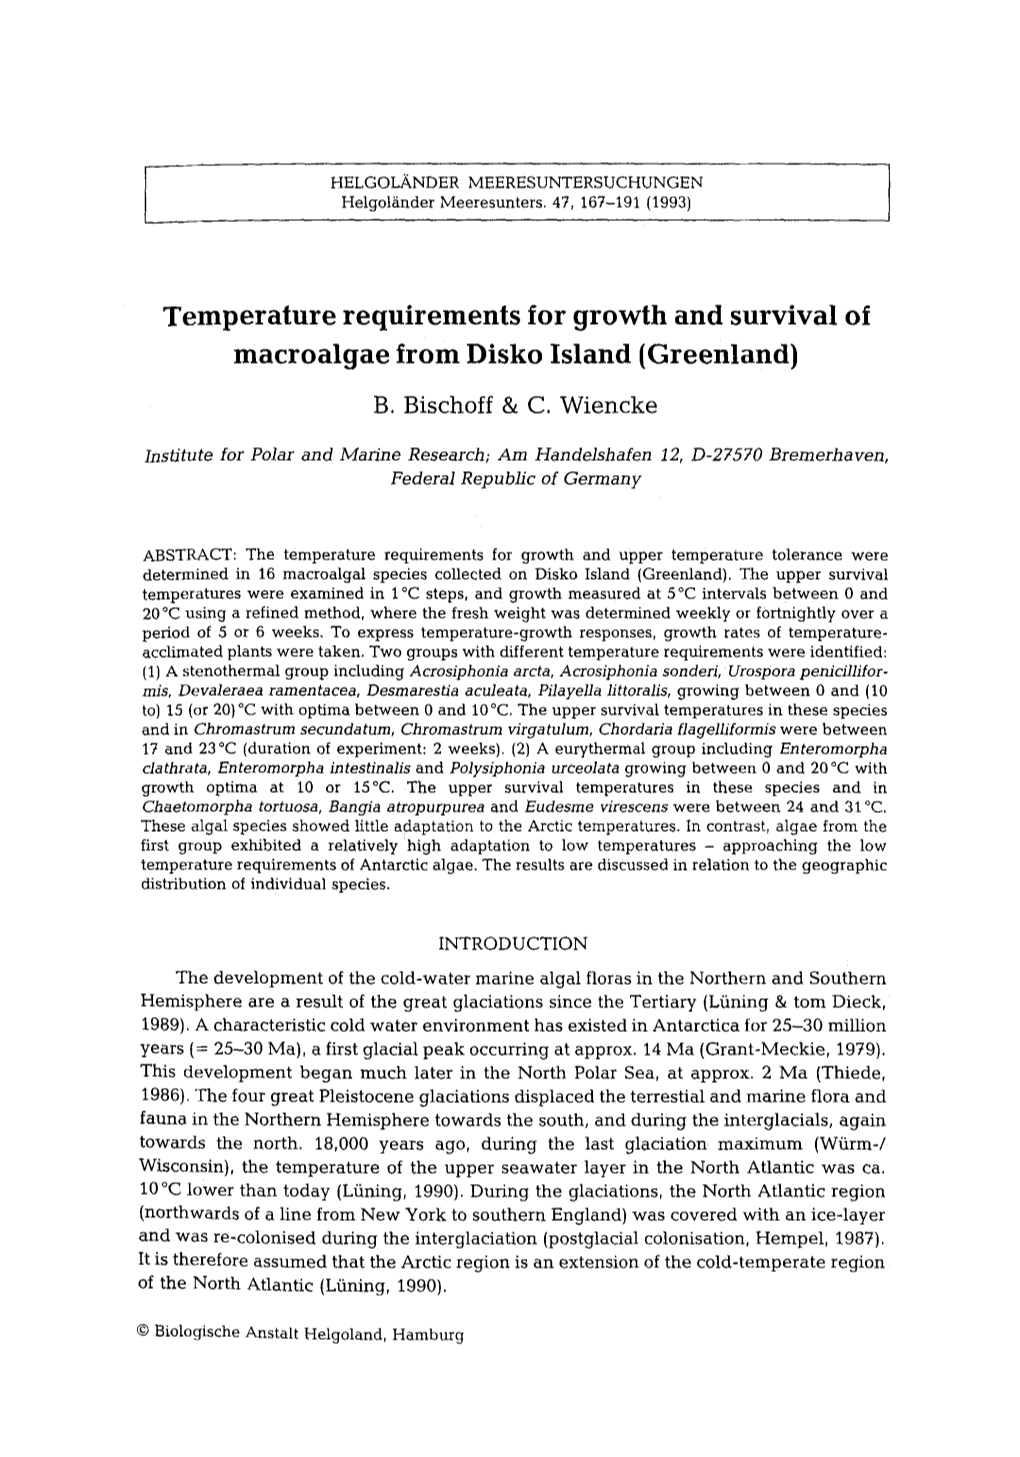 Temperature Requirements for Growth and Survival of Macroalgae from Disko Island (Greenland) B